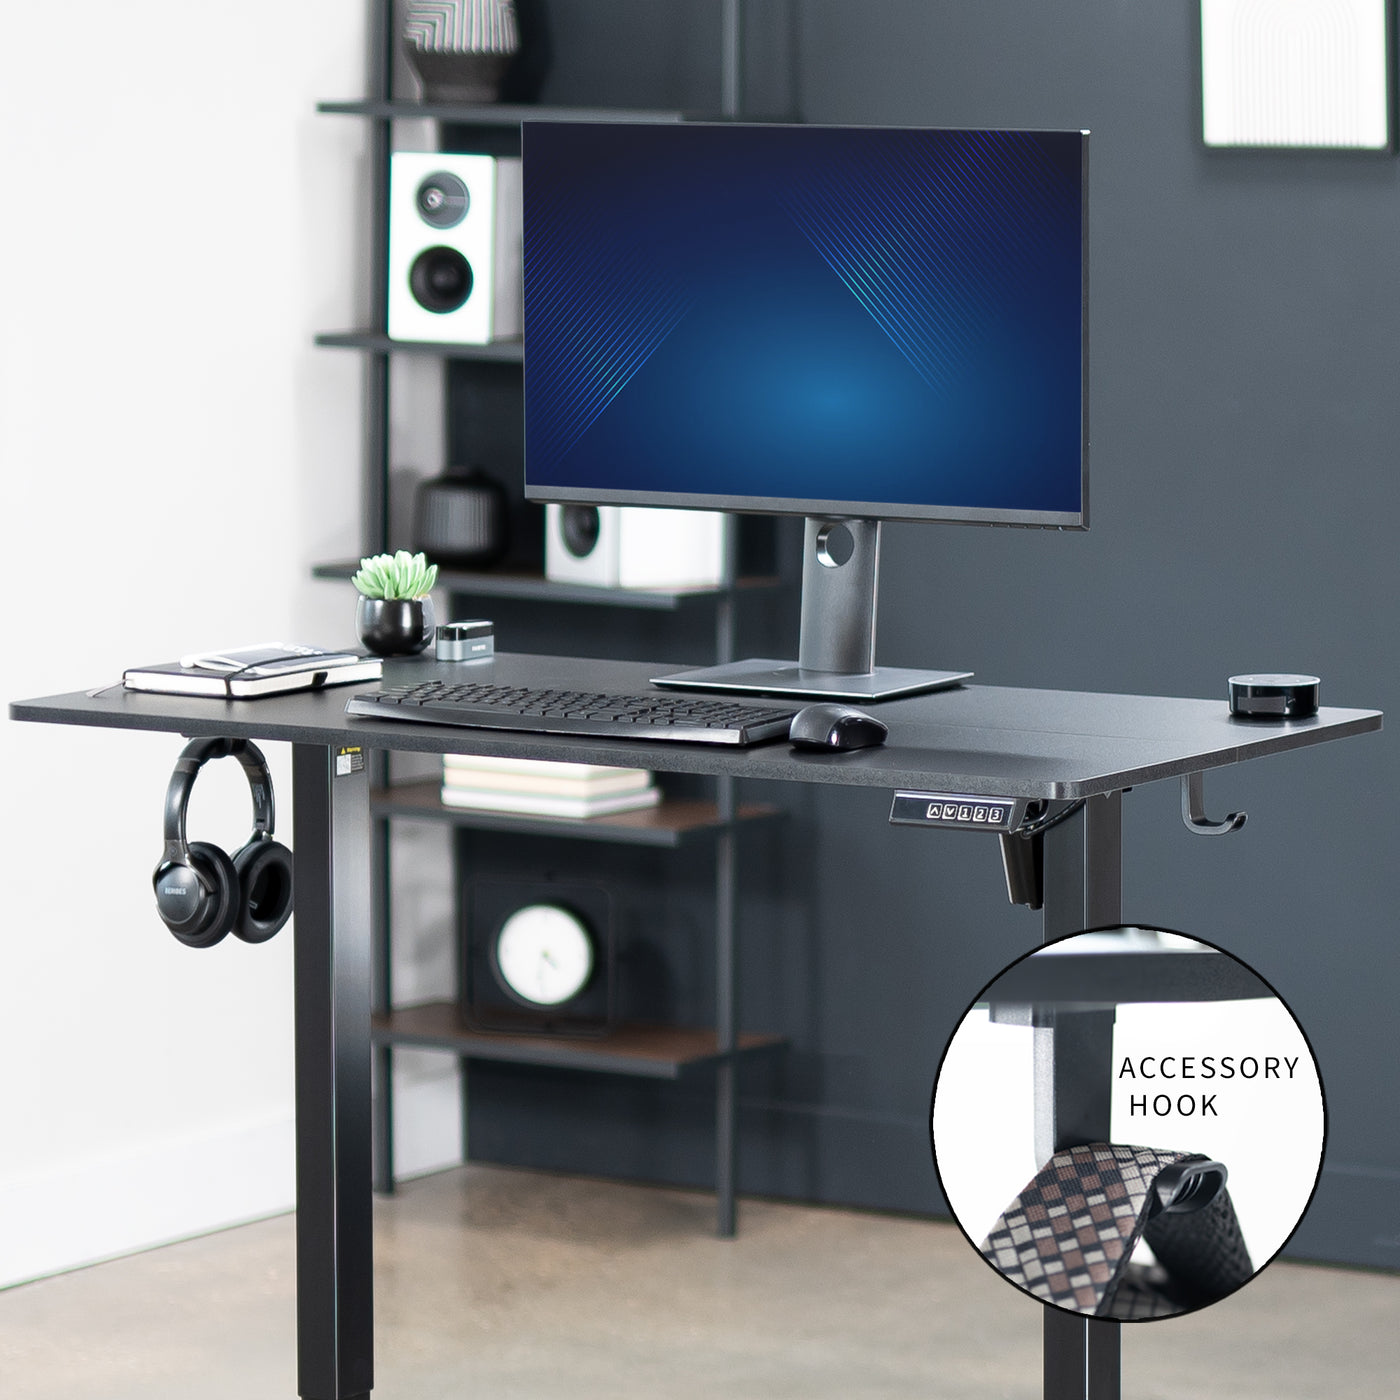 Electric 44" x 24" Sit Stand Desk Workstation Accessory Hook